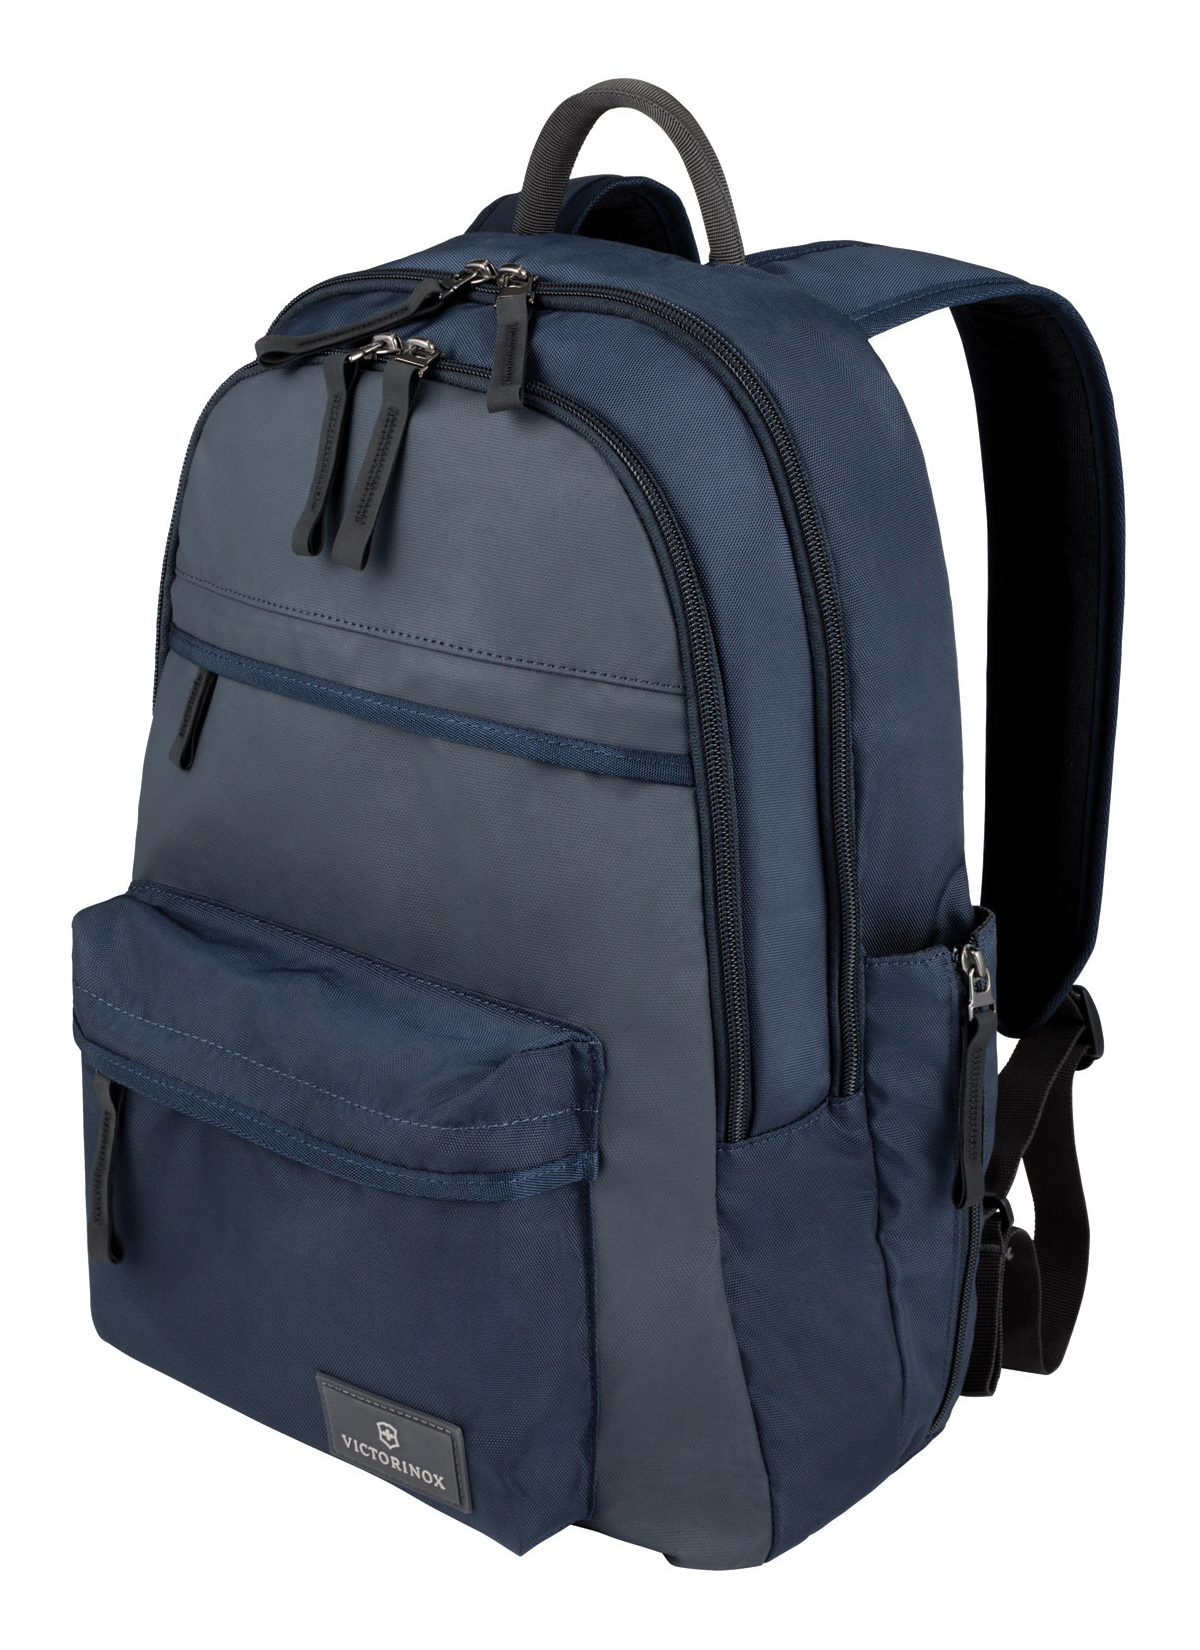 Online Victorinox Essentials Gear Pack Navy Backpack Prices - Shopclues ...